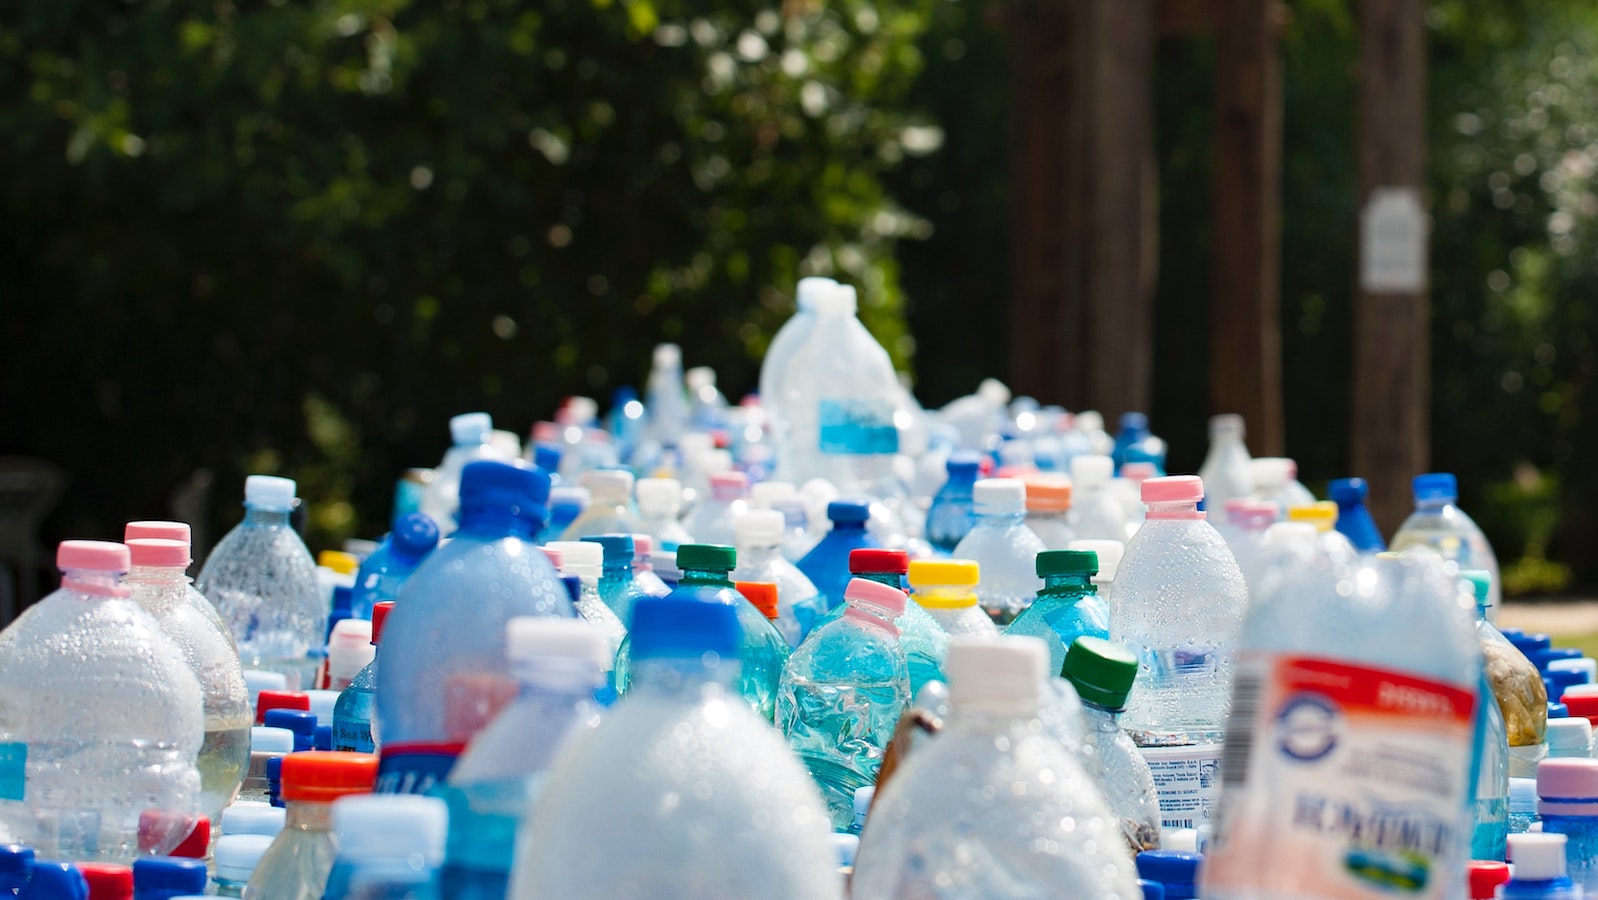 Numerous recyclable plastic bottles arranged in a group.